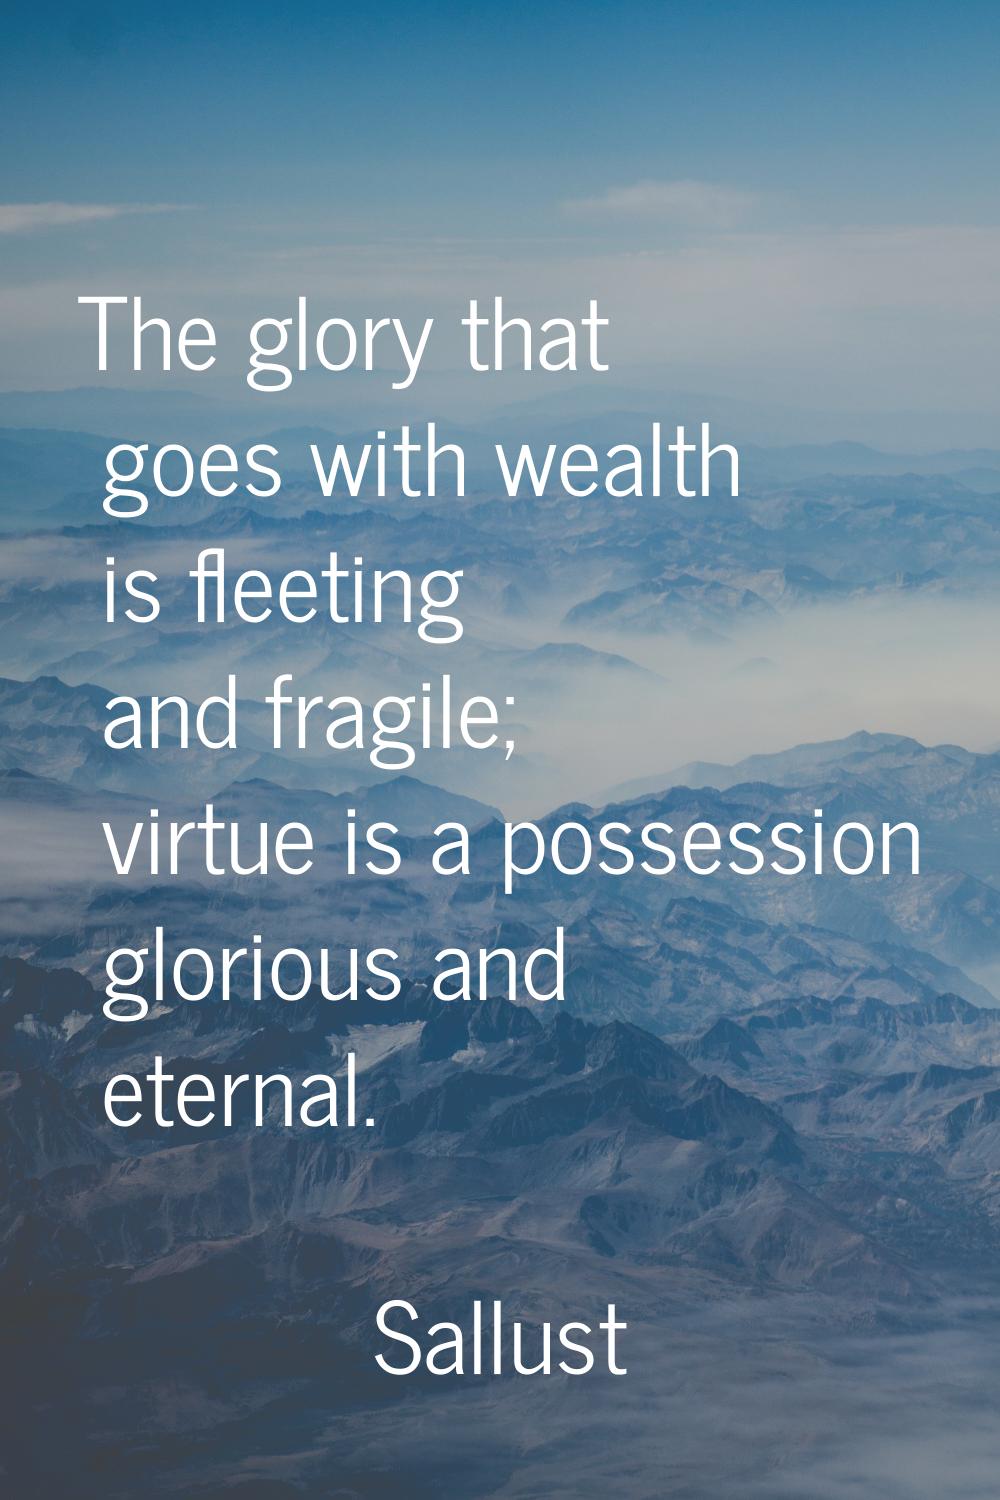 The glory that goes with wealth is fleeting and fragile; virtue is a possession glorious and eterna